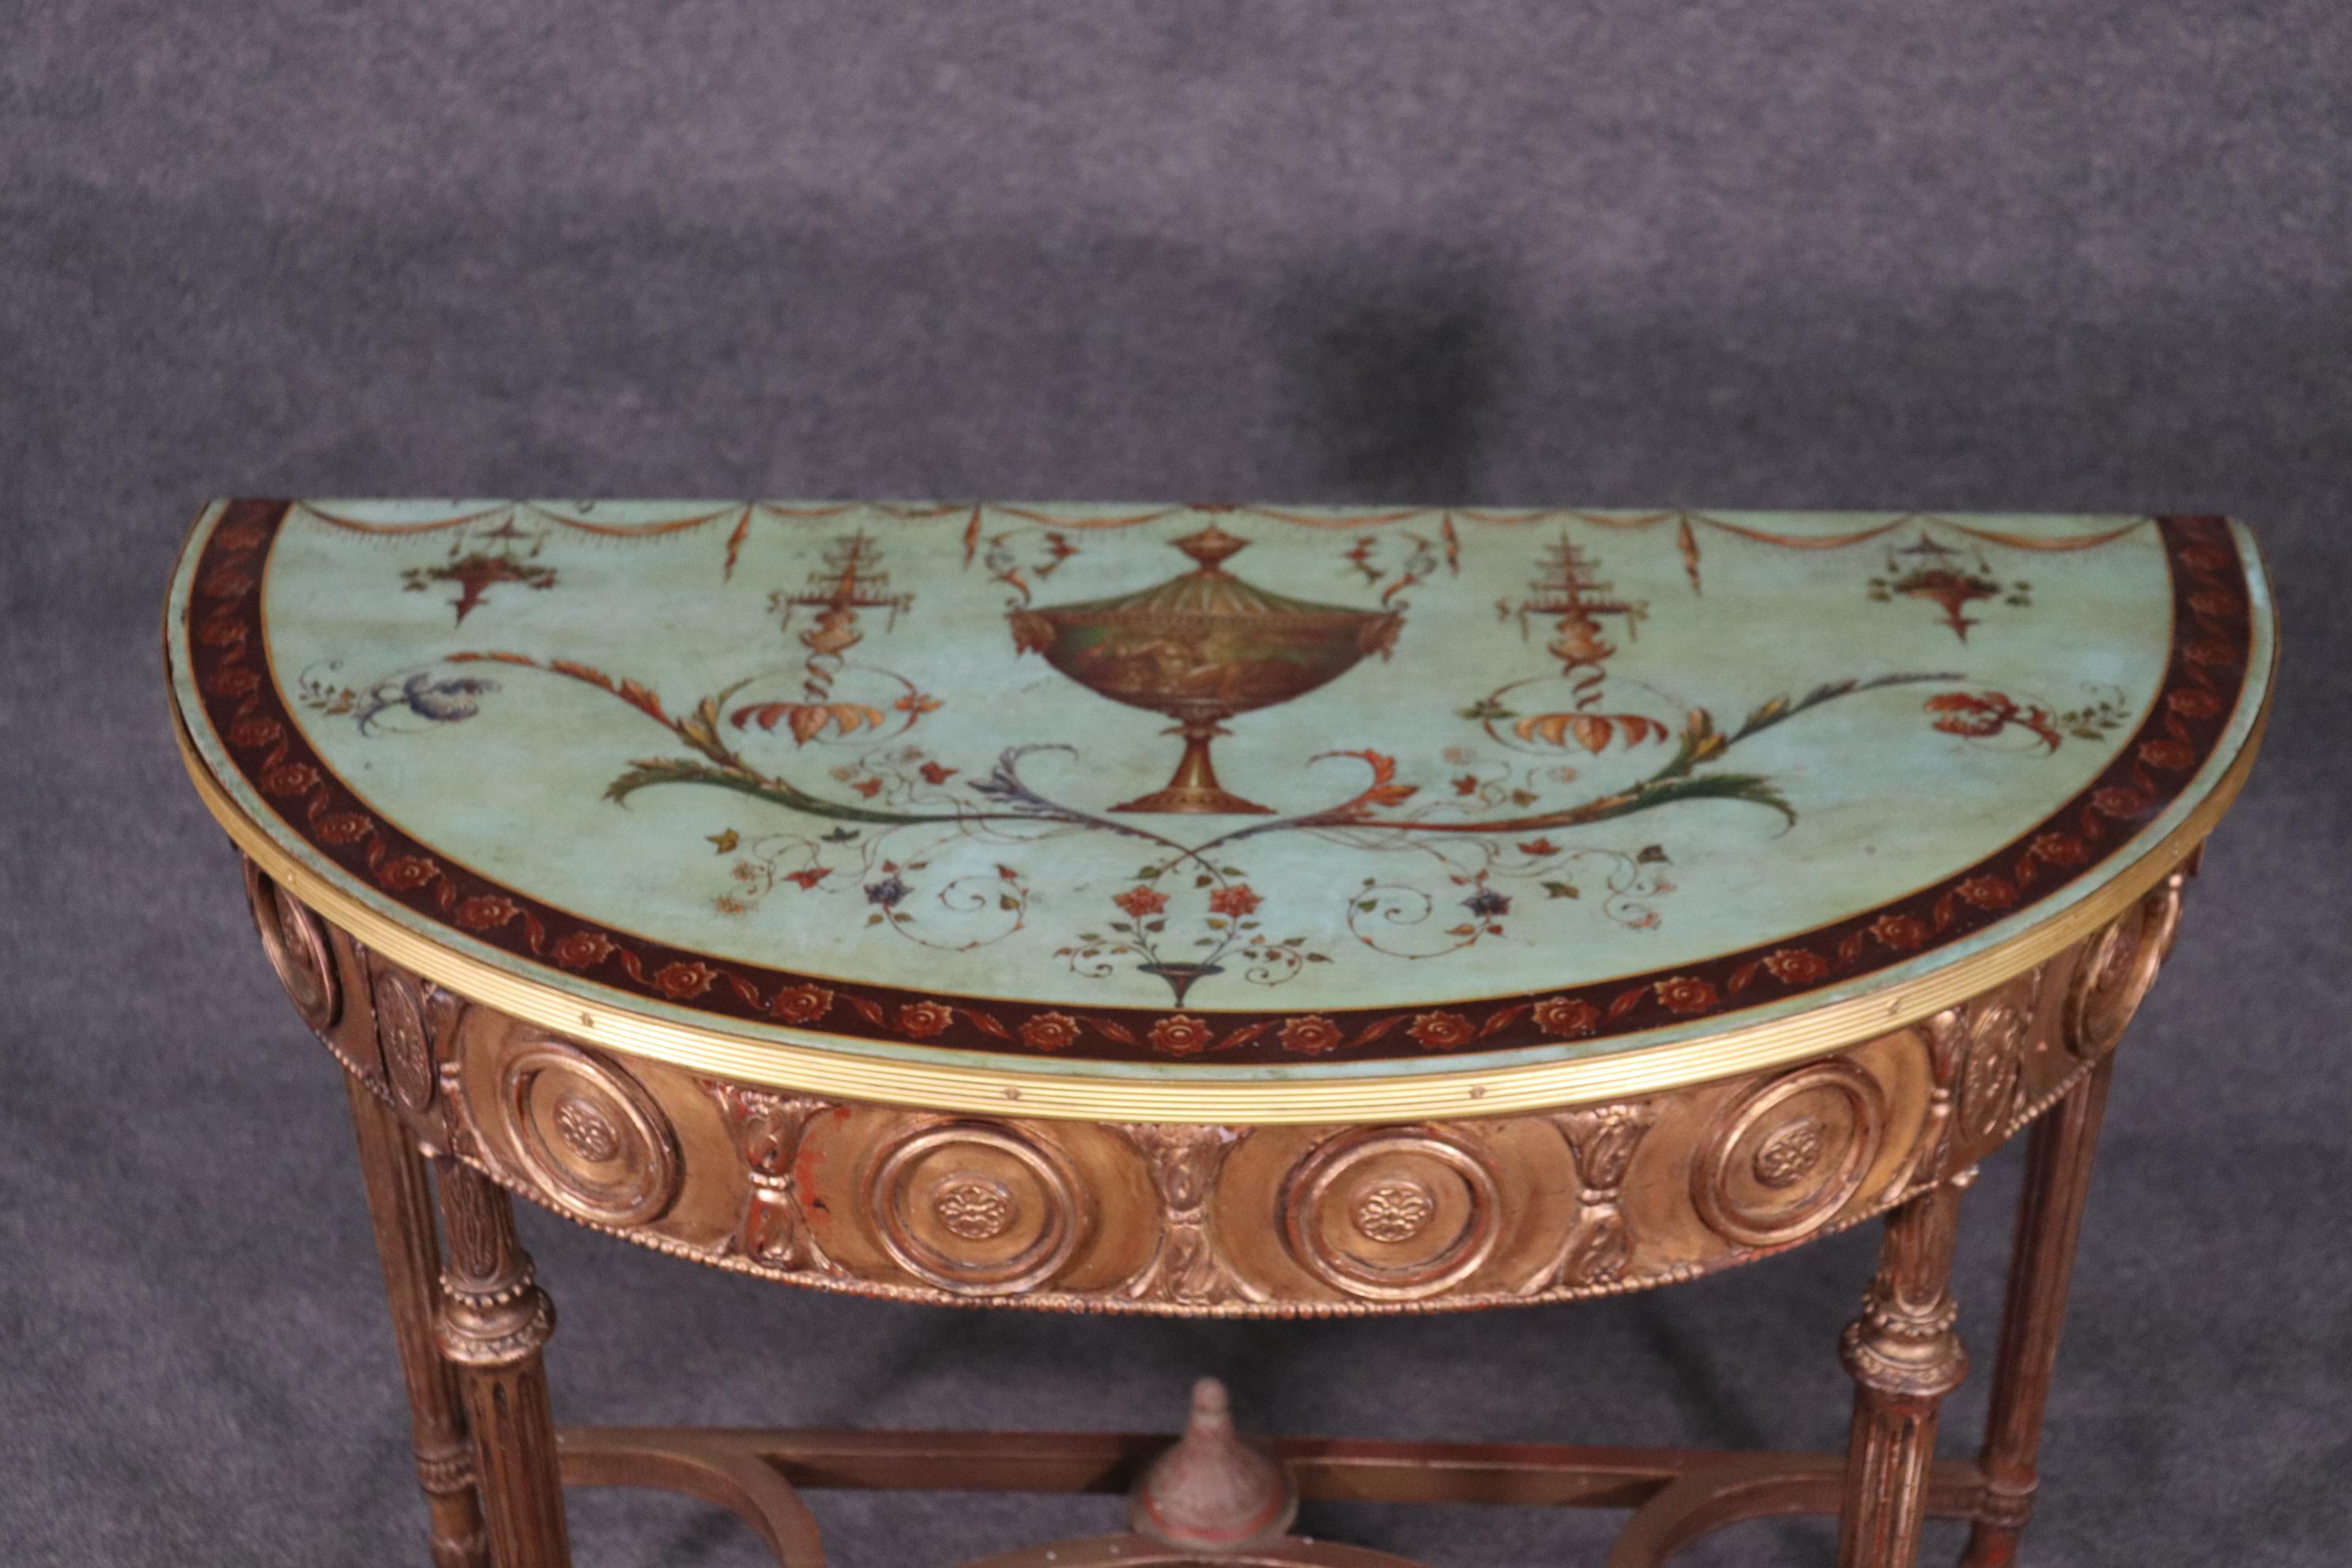 This is a spectacular and extremely unique Adams console table. Look at the finish of the robin's egg blue top and the gorgeous gilded carved front. The table measures 40 wide x 19 deep x 35 tall. The table dates to teh 1880s-90s era.